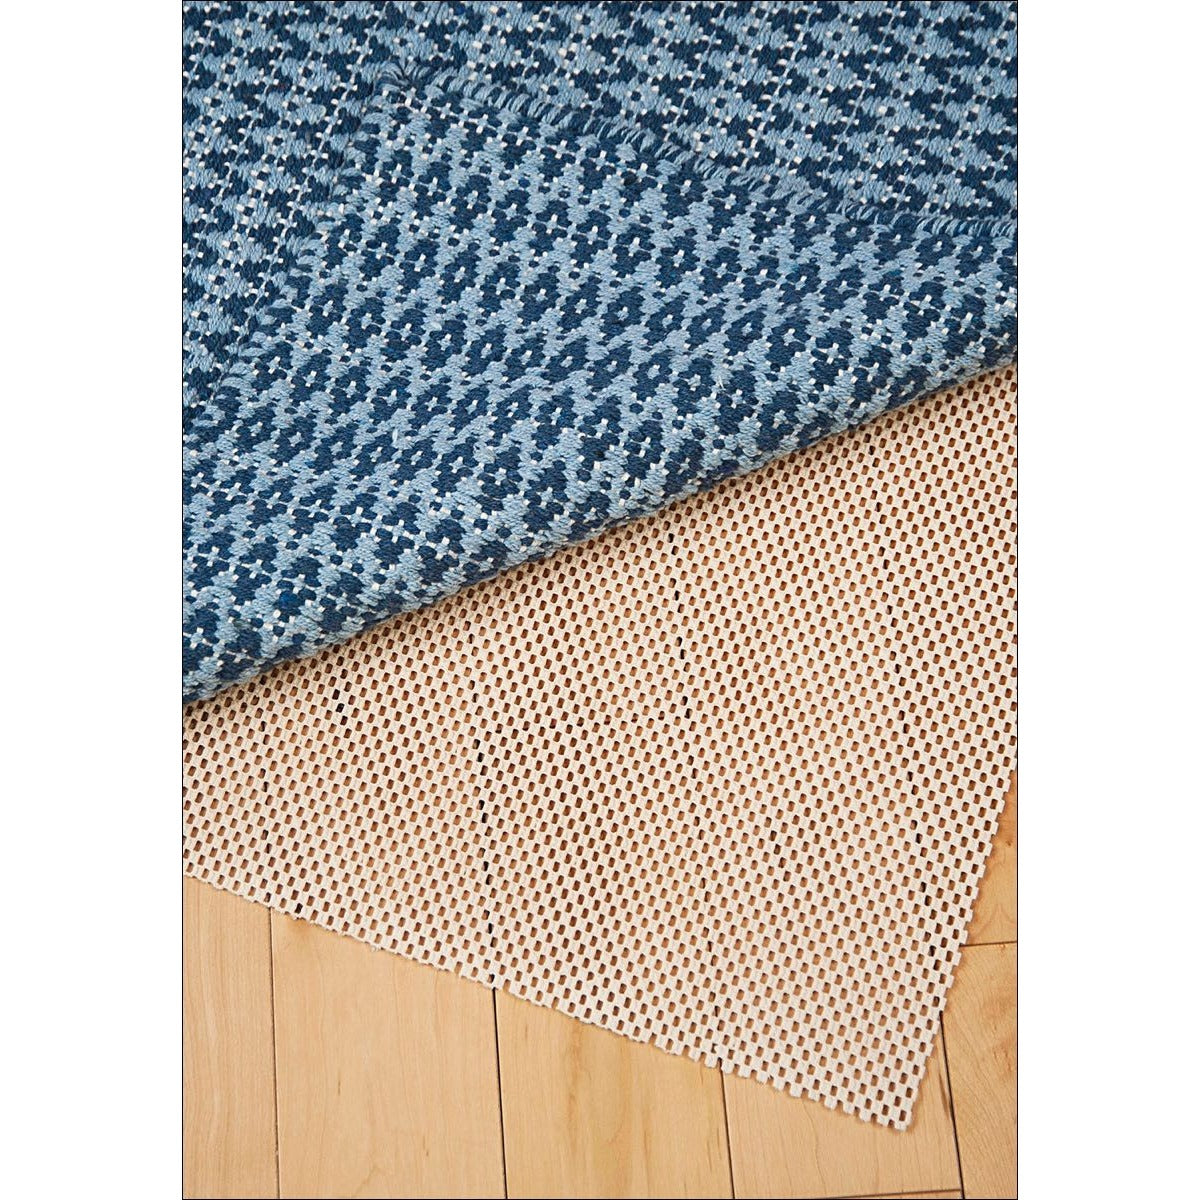 Rug Pad For Wood Or Tiled Floors Rugs Of Beauty